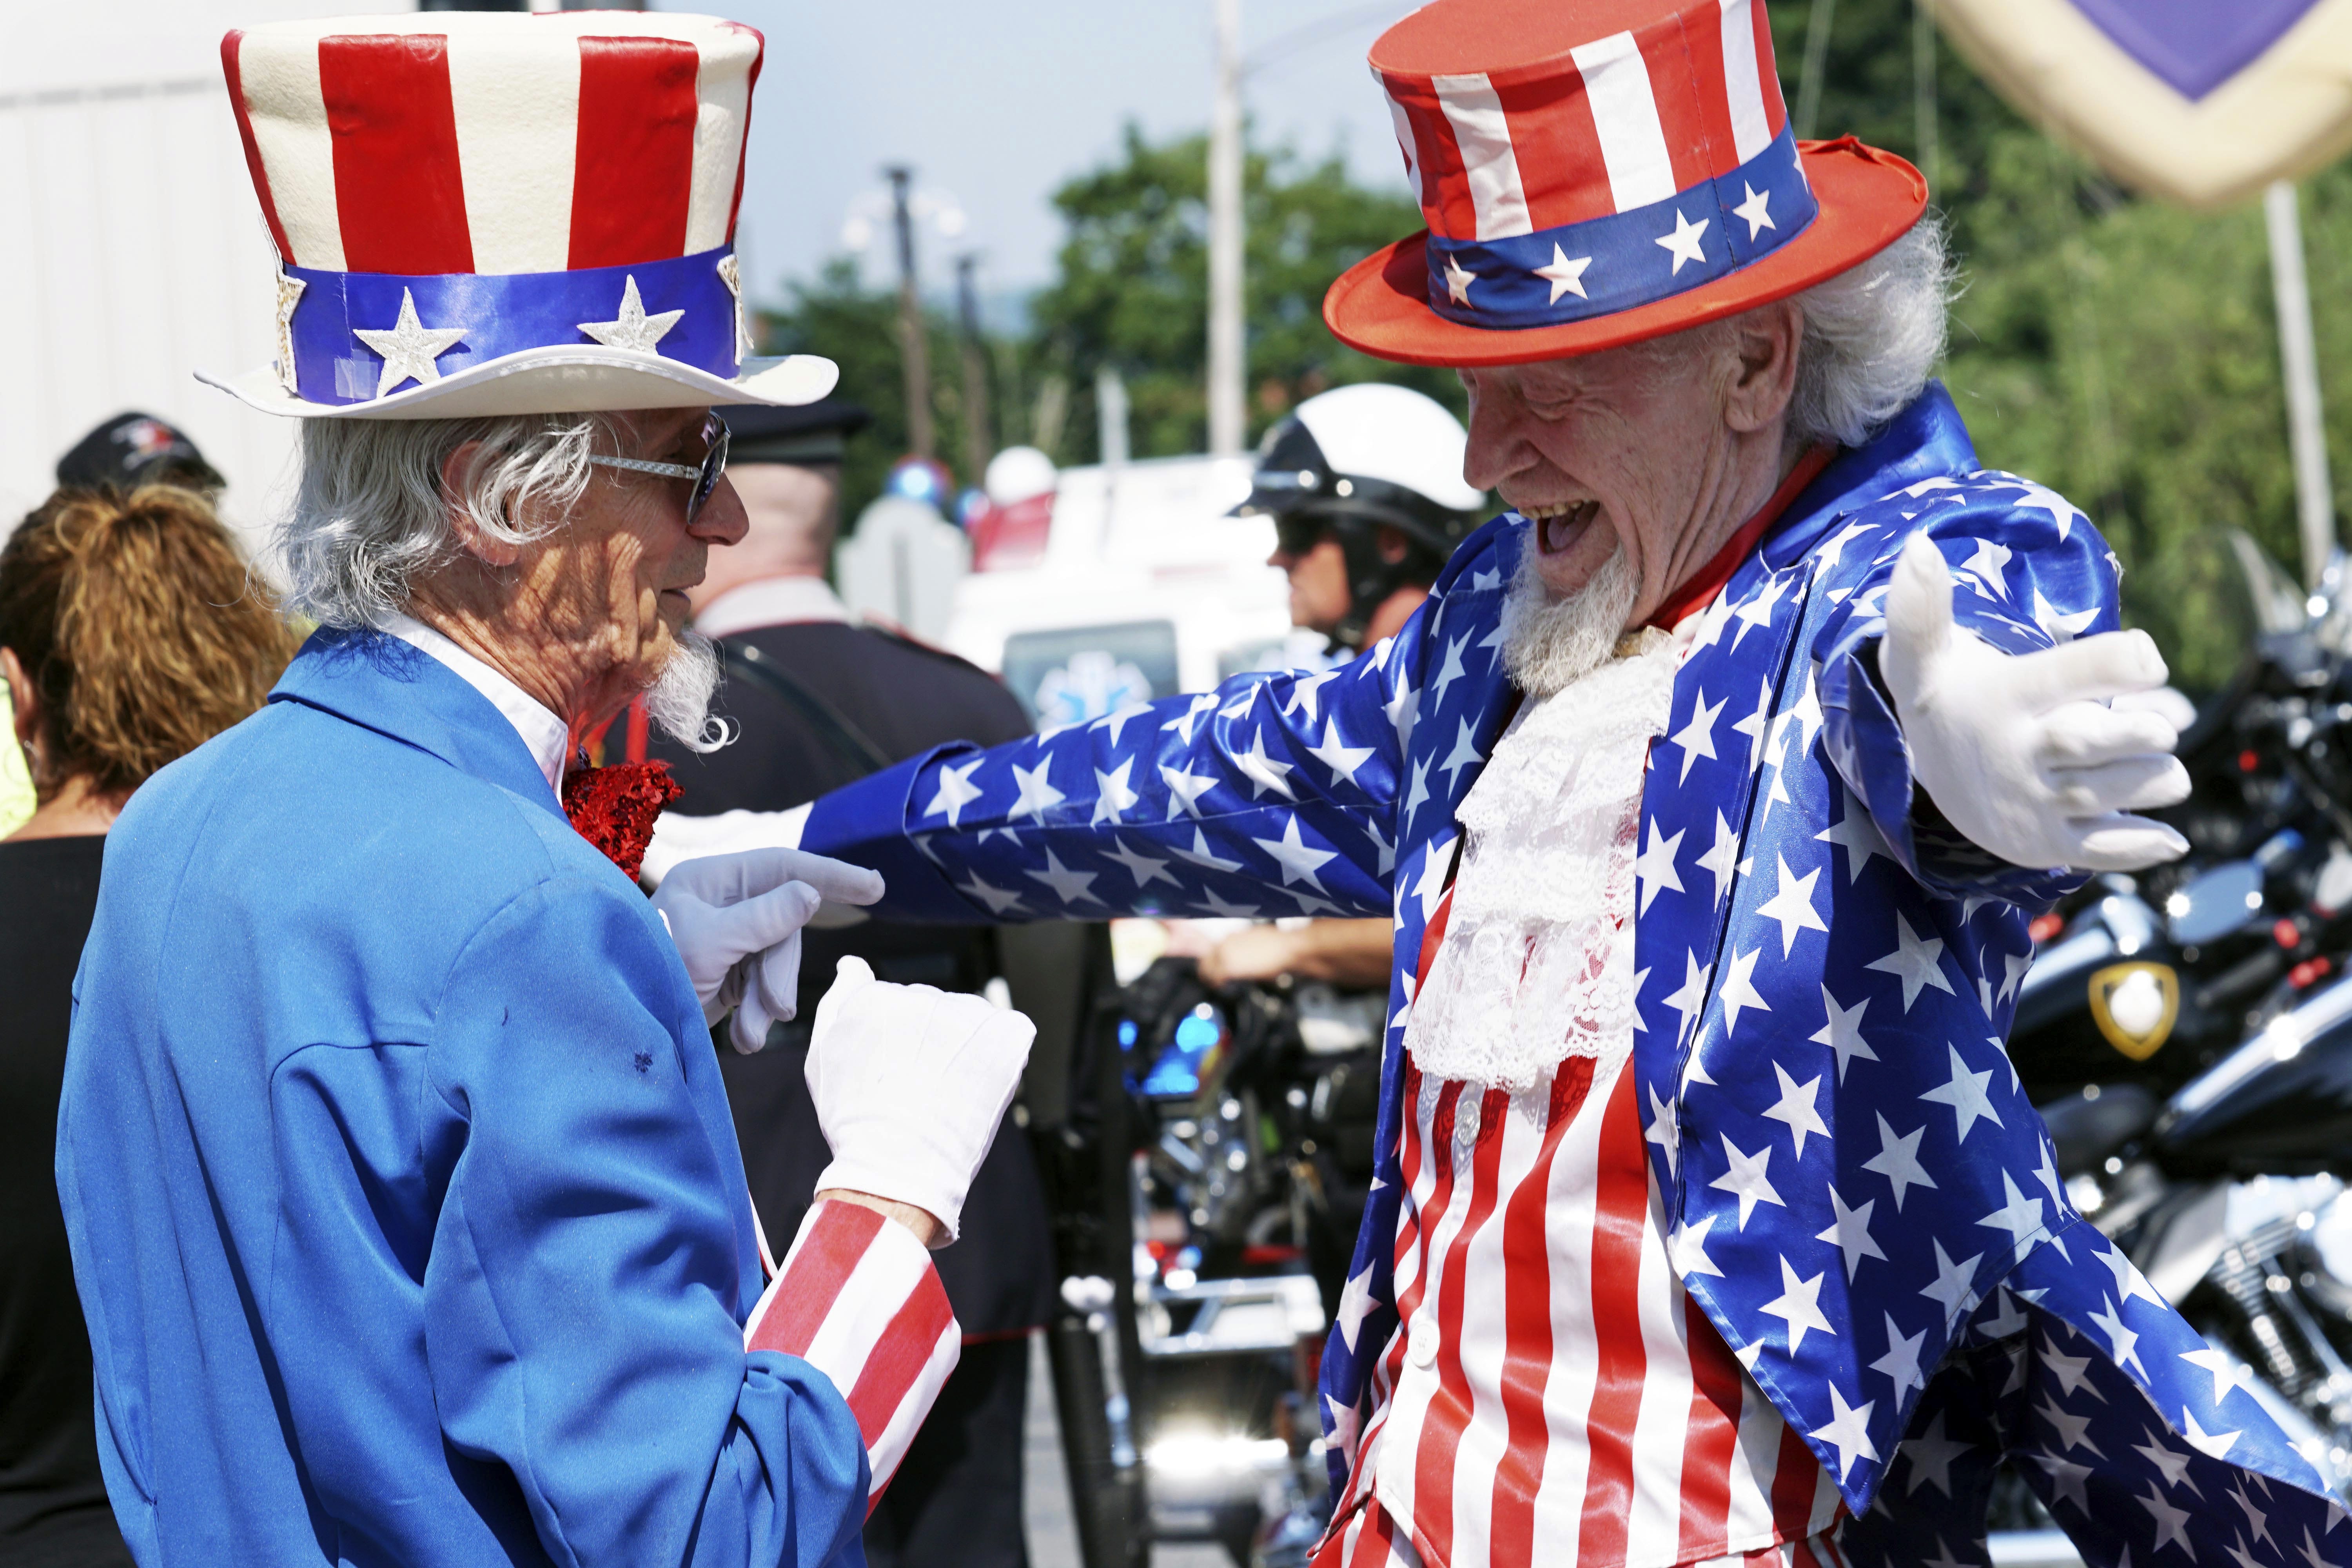 Uncle Sams Fred Polnisch and Gordon Dunham greet each other before the Fourth of July Parade, Thursday July 4, 2019, in the Pittsfield, Mass.